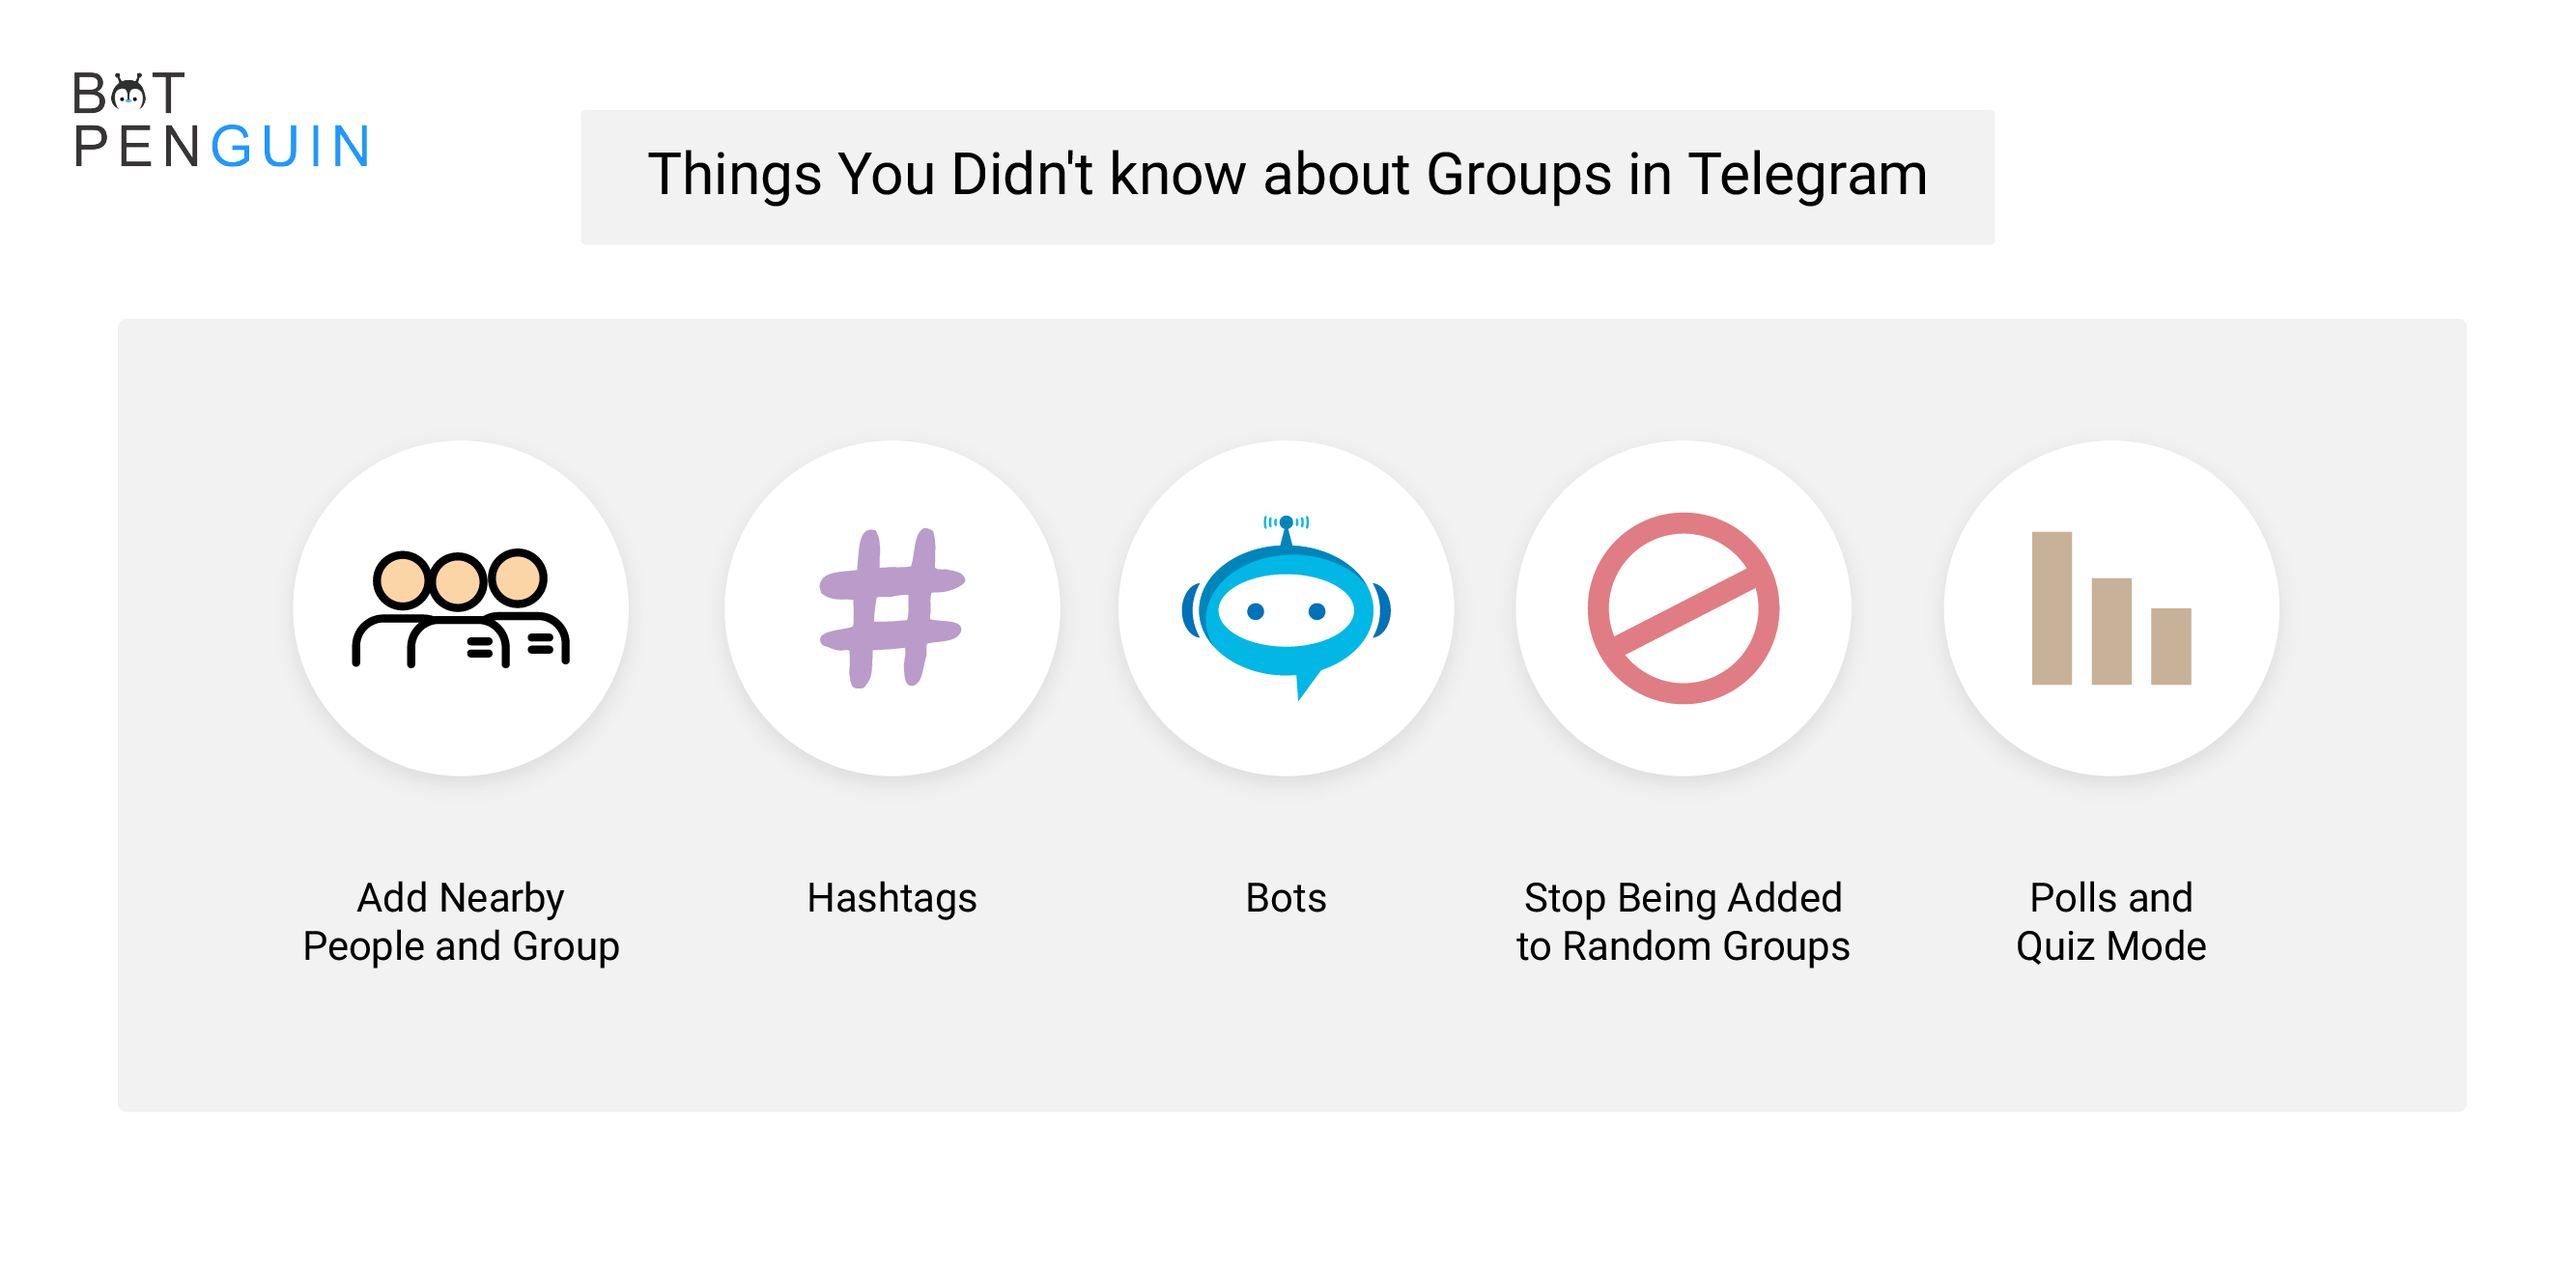 5 Things You Didn't know about Groups in Telegram